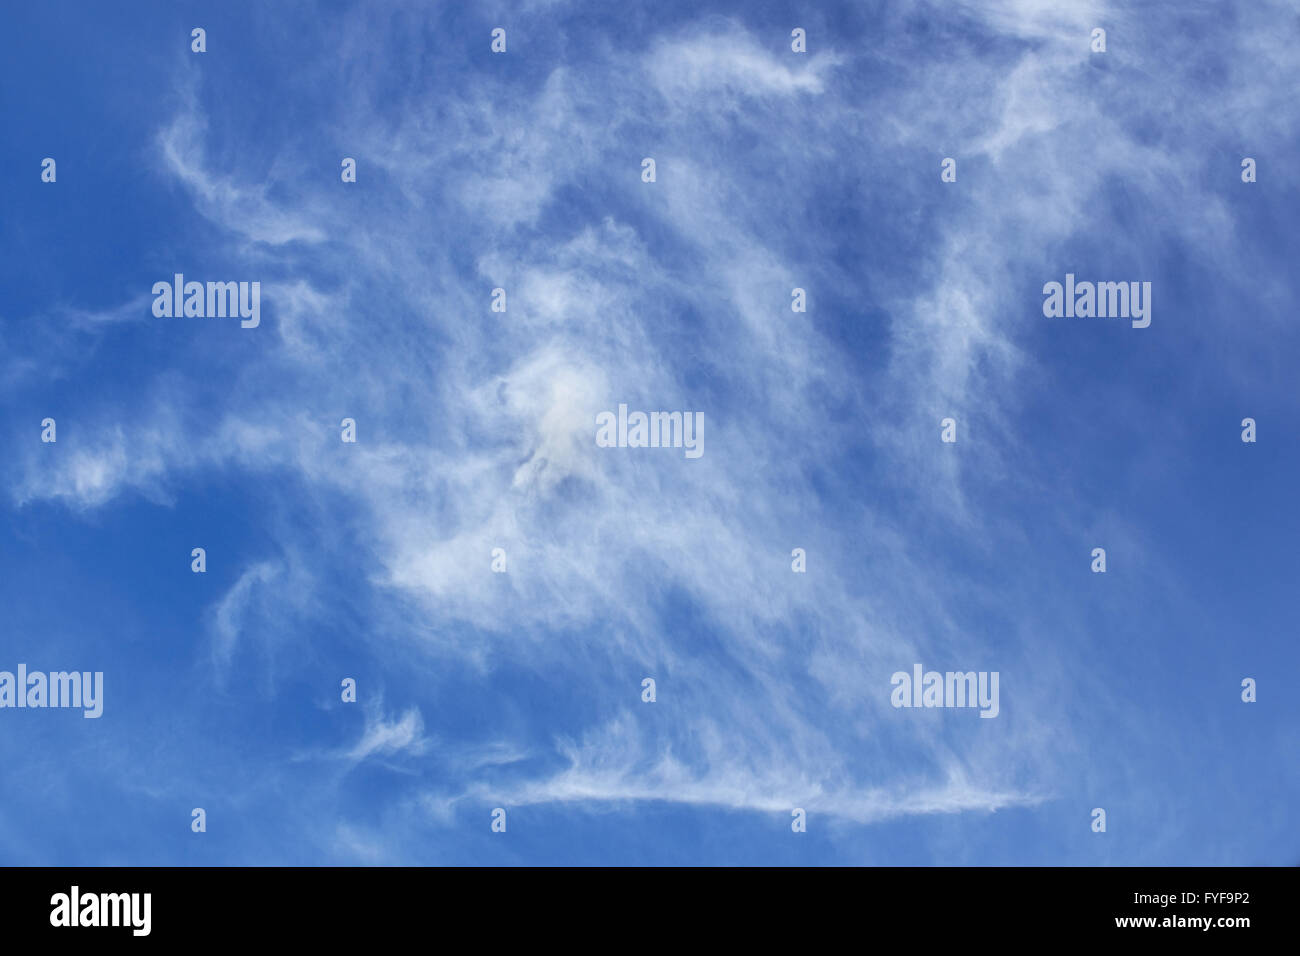 Abstract oblong clouds Stock Photo